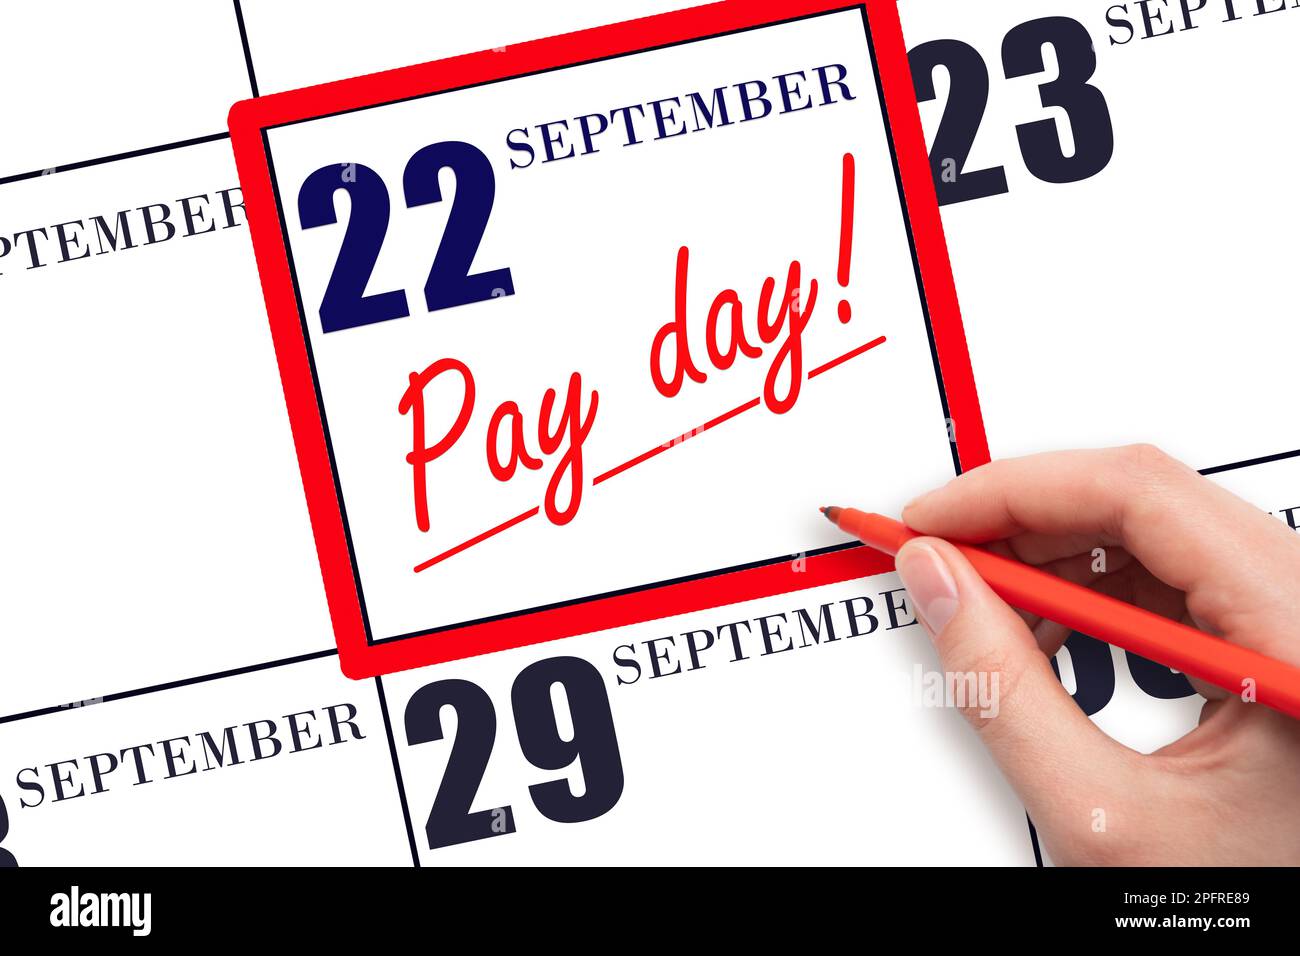 22nd day of September. Hand writing text PAY DATE on calendar date September  22 and underline it. Payment due date.  Reminder concept of payment. Aut Stock Photo